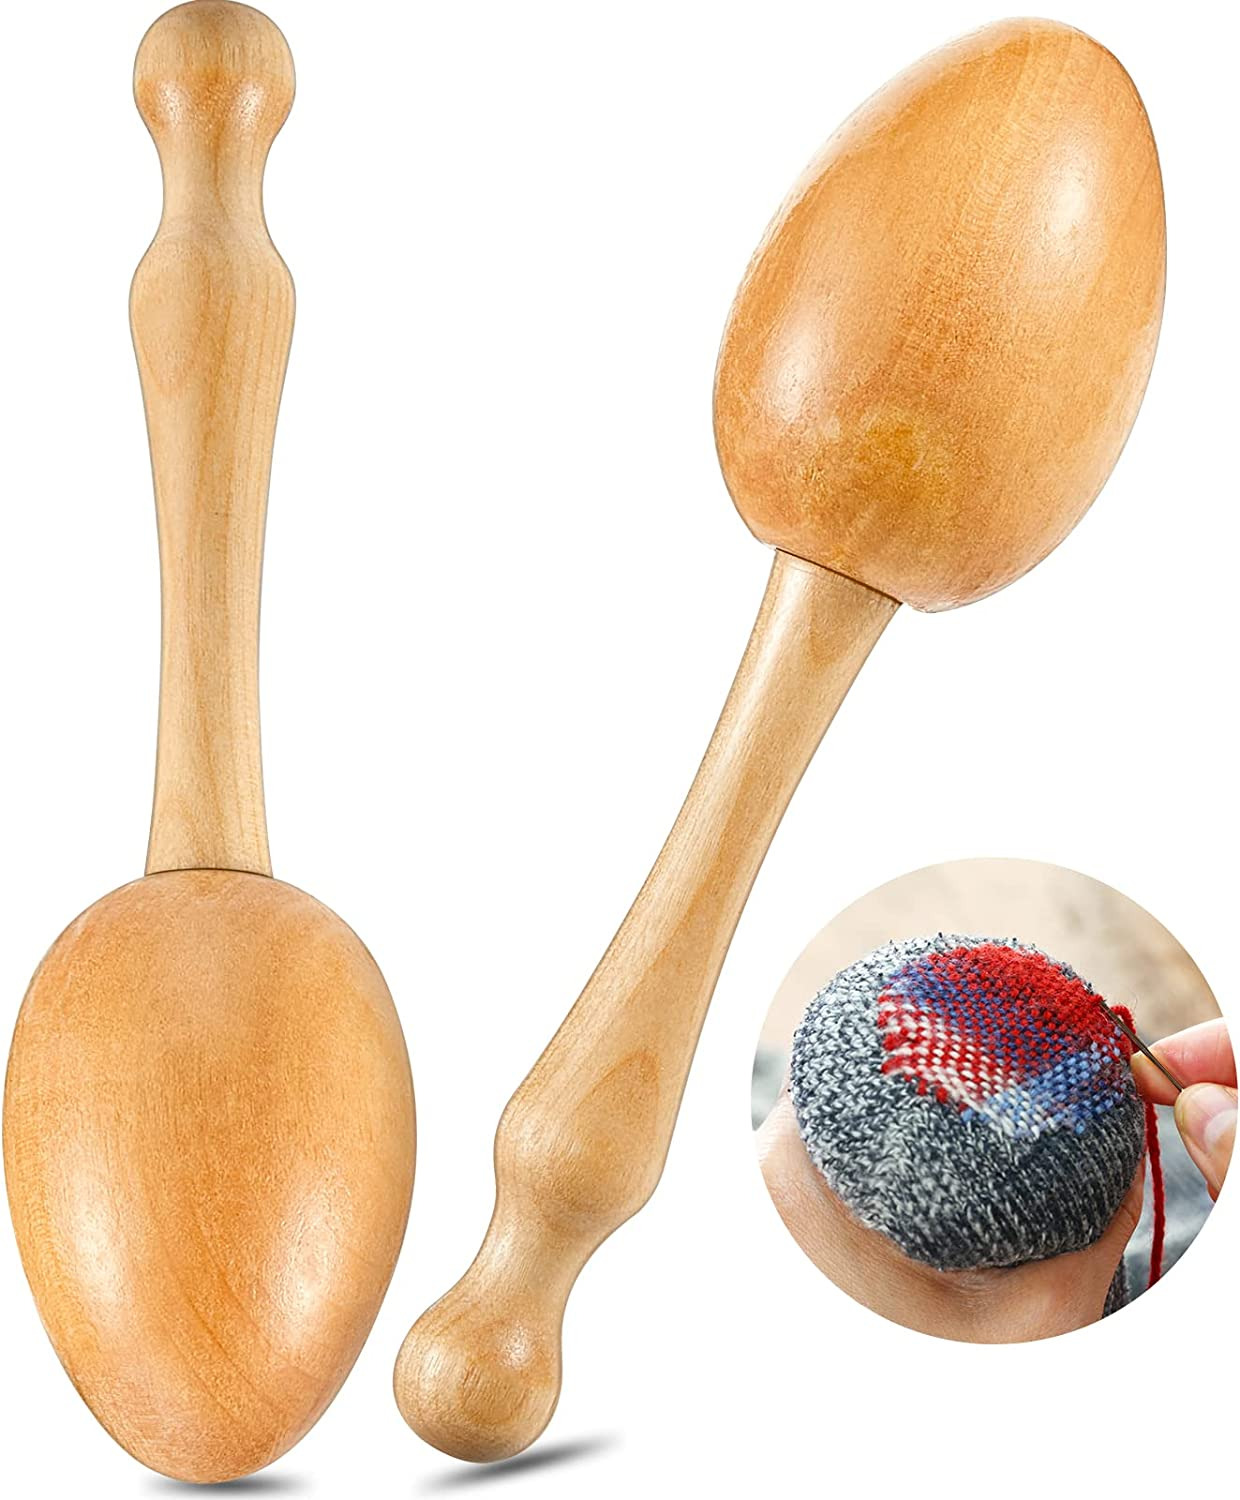 2 Pieces Darning Eggs Wooden Darning Egg for Socks Wood Darning Supplies for Soc